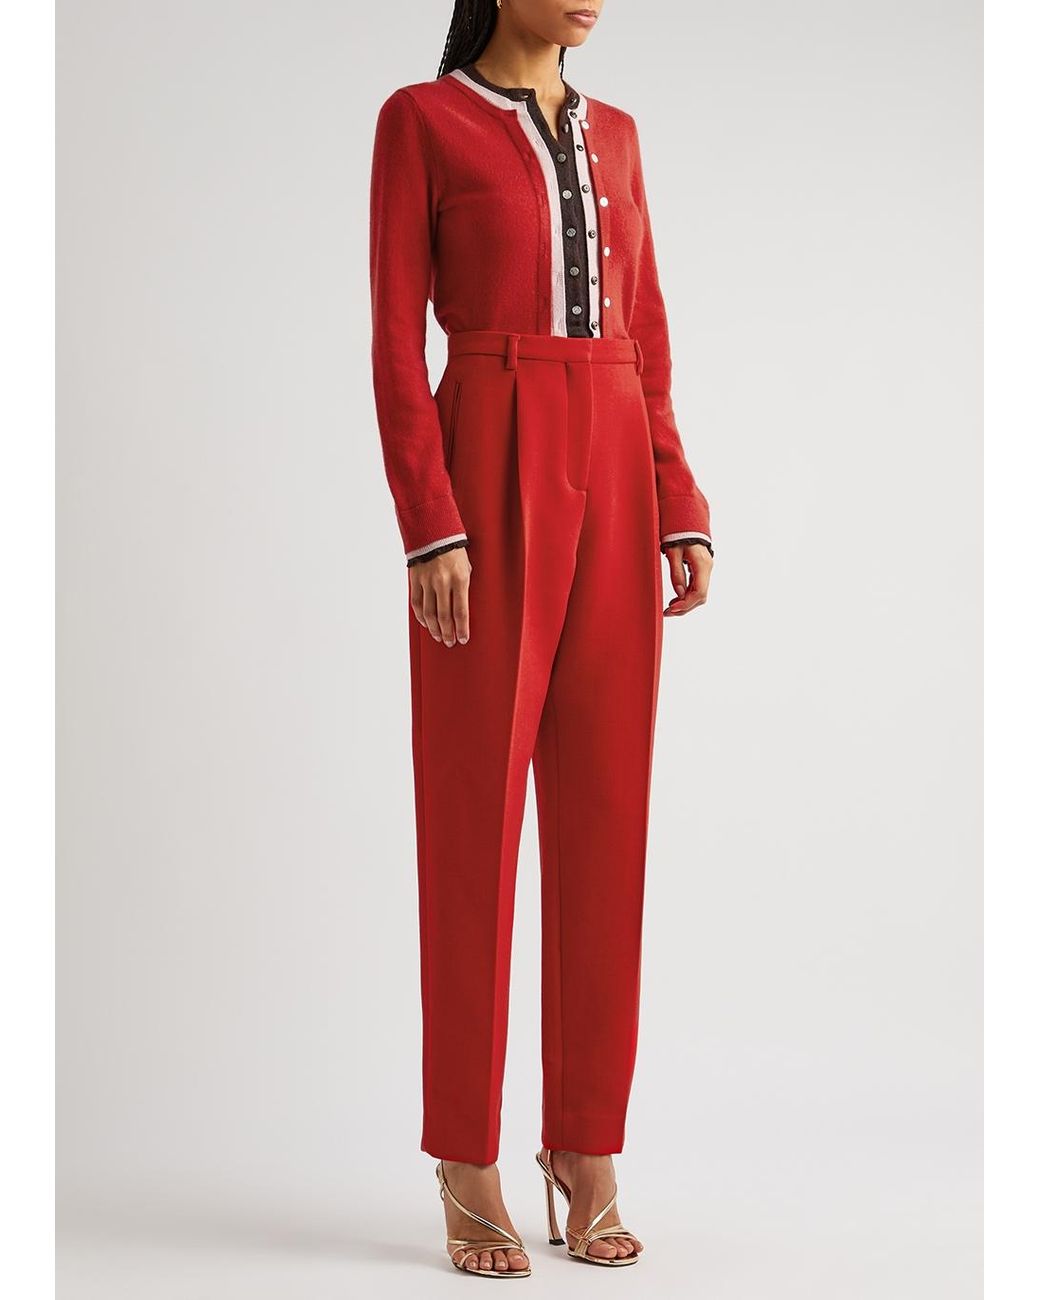 Tory Burch Laye Cashmere Cardigan in Red | Lyst